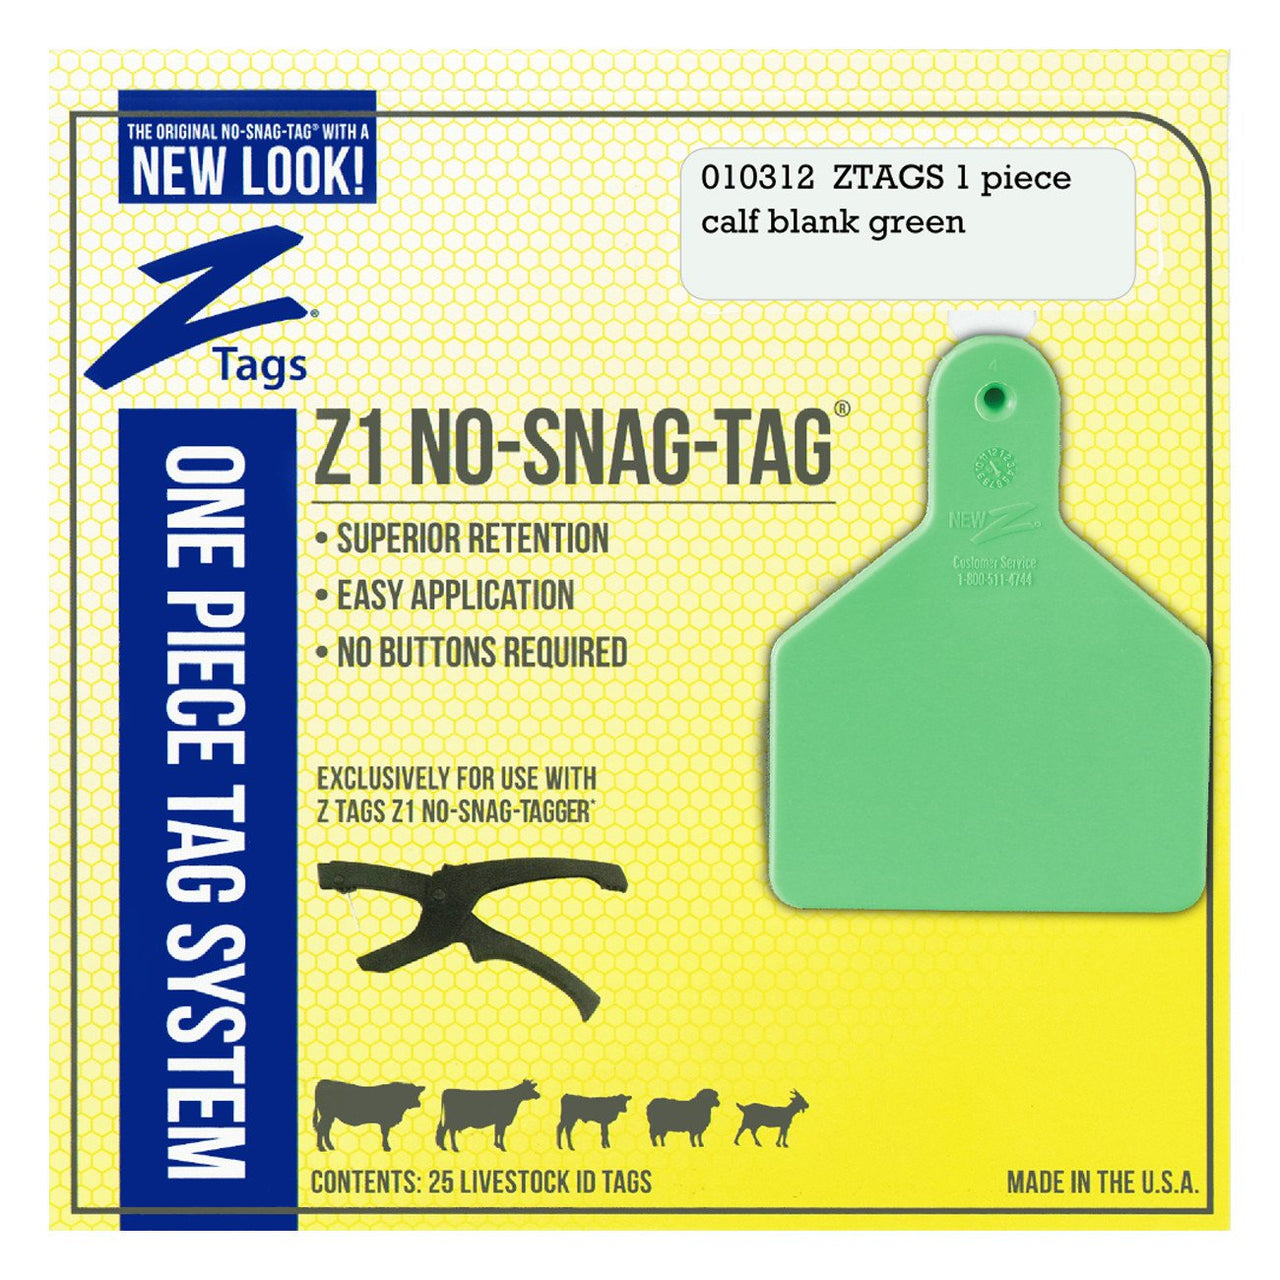 Z Tags 1 Piece Calf Blank (Green) 25 Pack - 1 Piece Short Neck Calf Blank Tag Z Tags - Canada